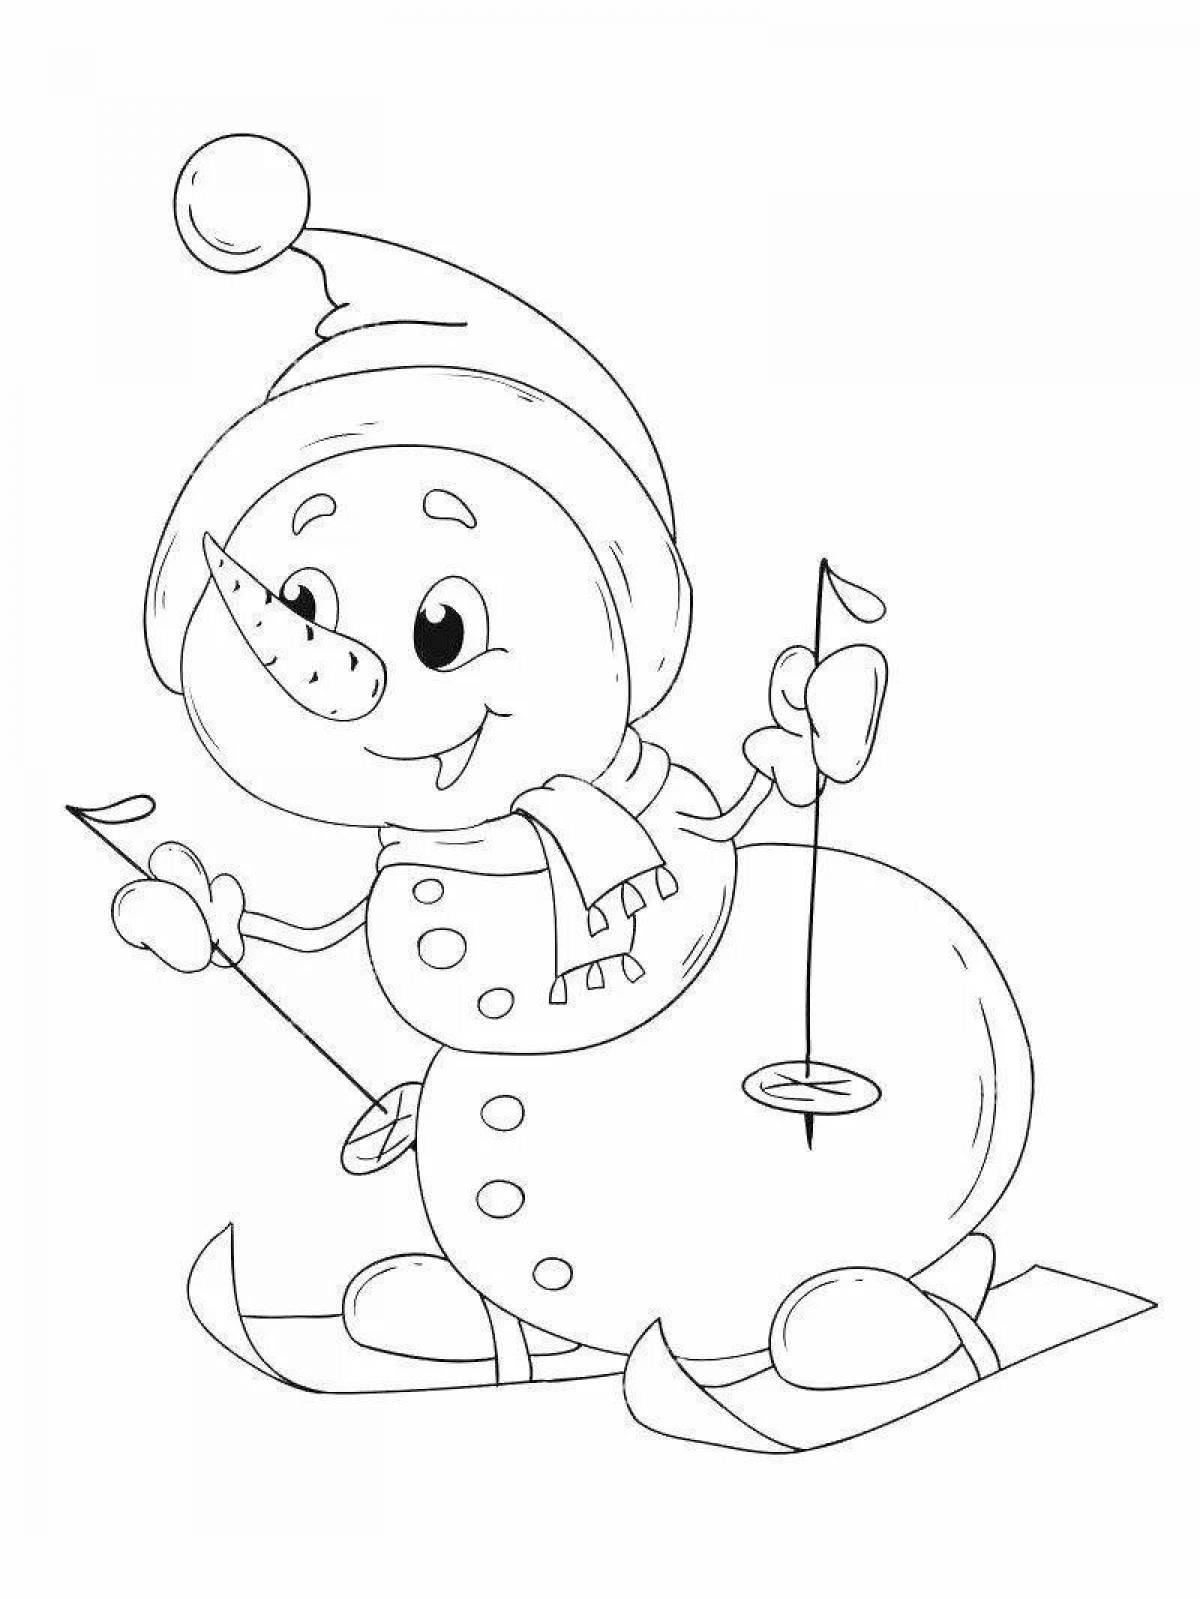 Adorable snowman on sled coloring page